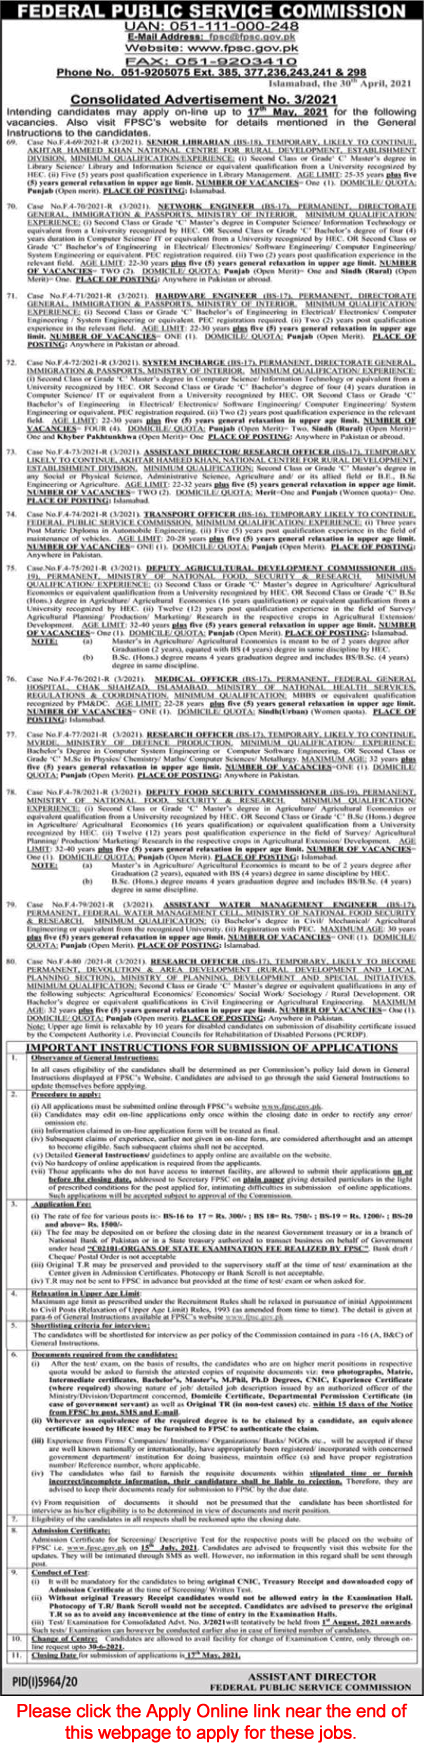 FPSC Jobs May 2021 Apply Online Consolidated Advertisement No 03/2021 3/2021 Latest